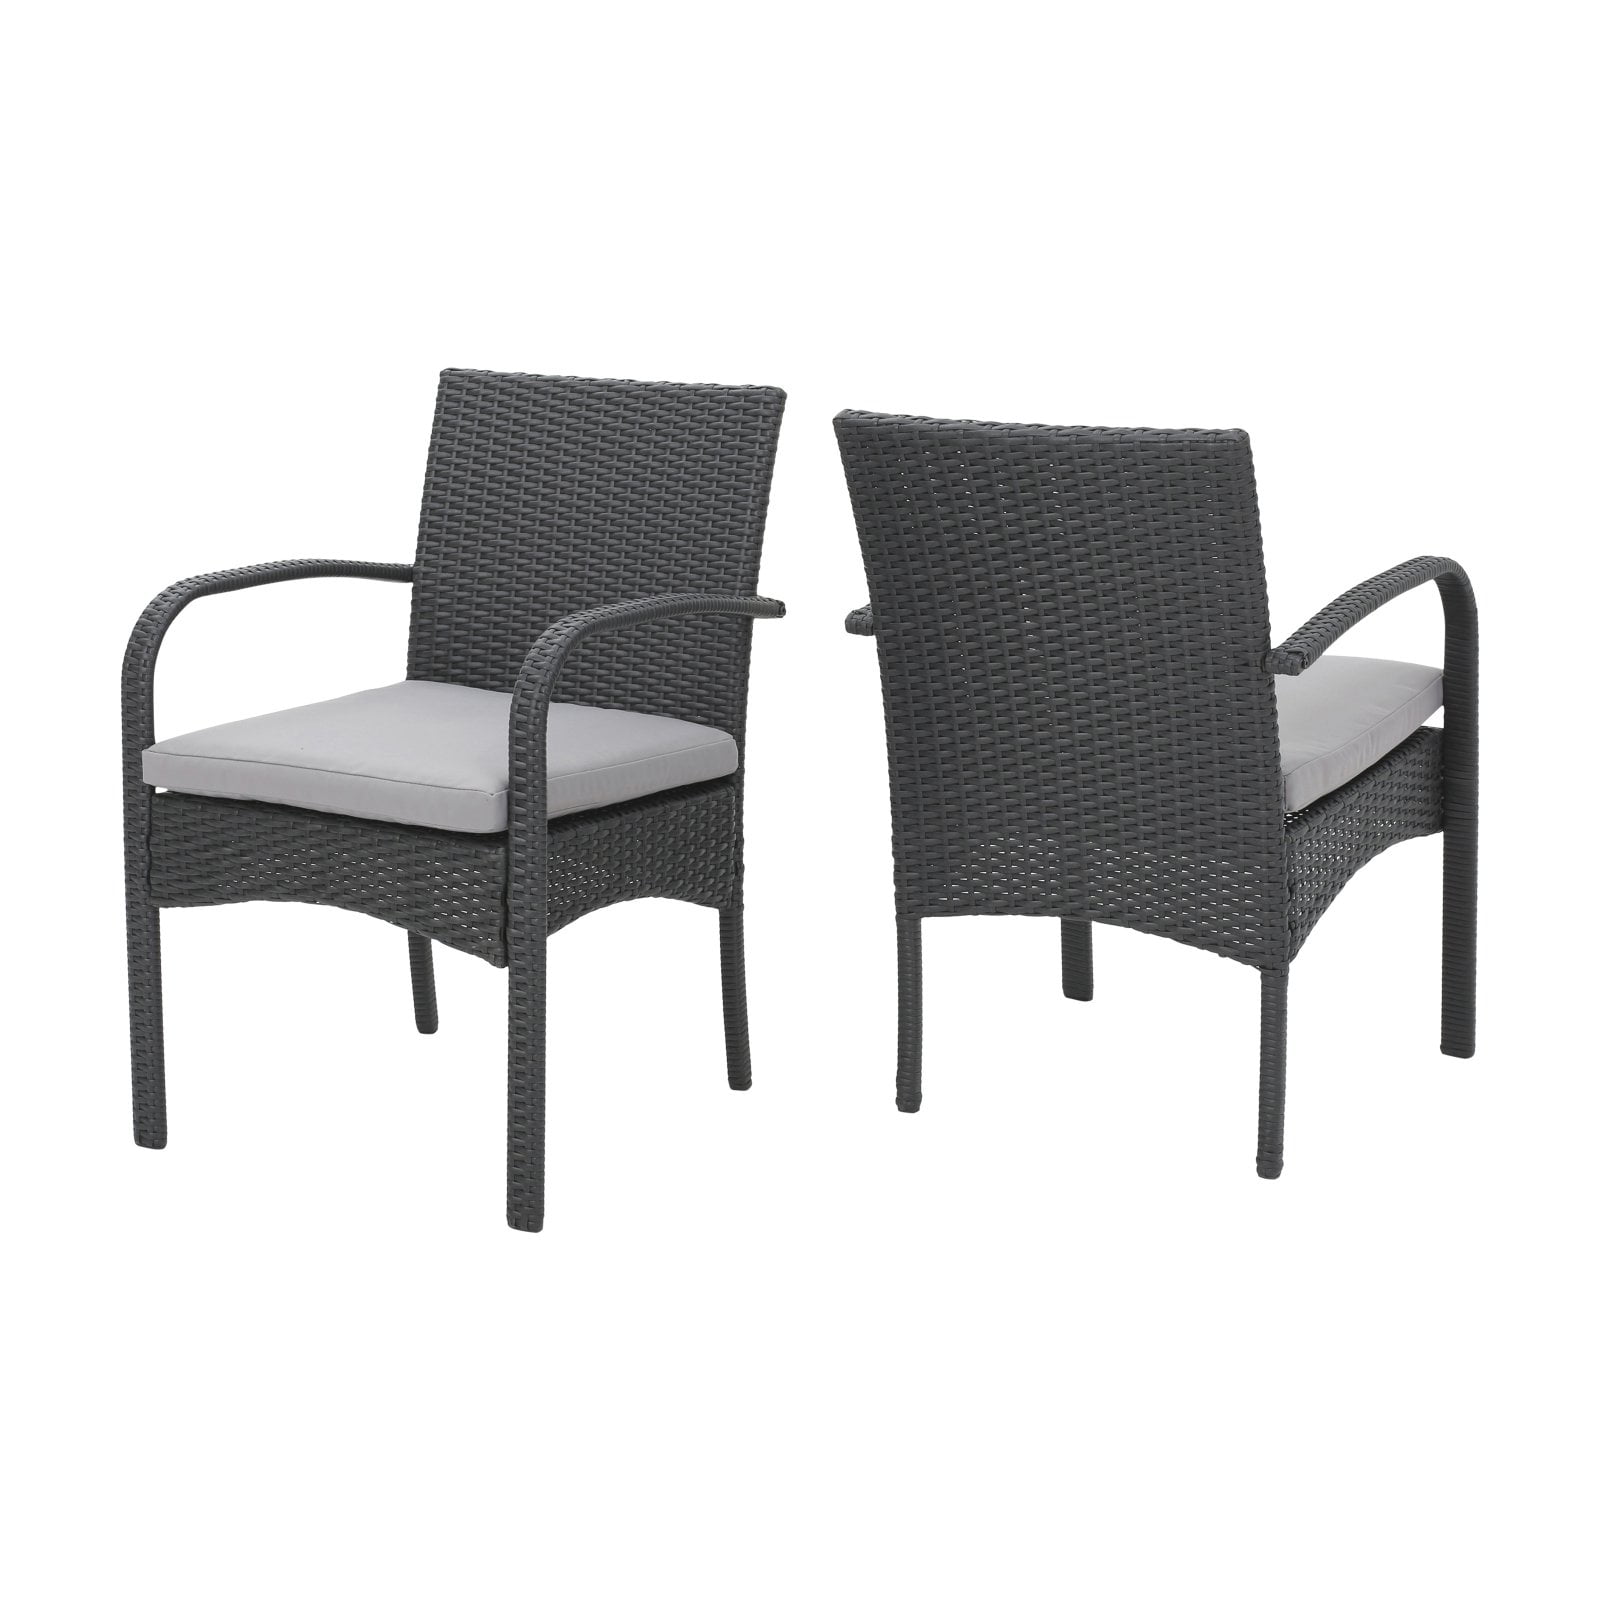 Black Christopher Knight Home 312244 Raevyn Outdoor Dining Chair Set of 2 